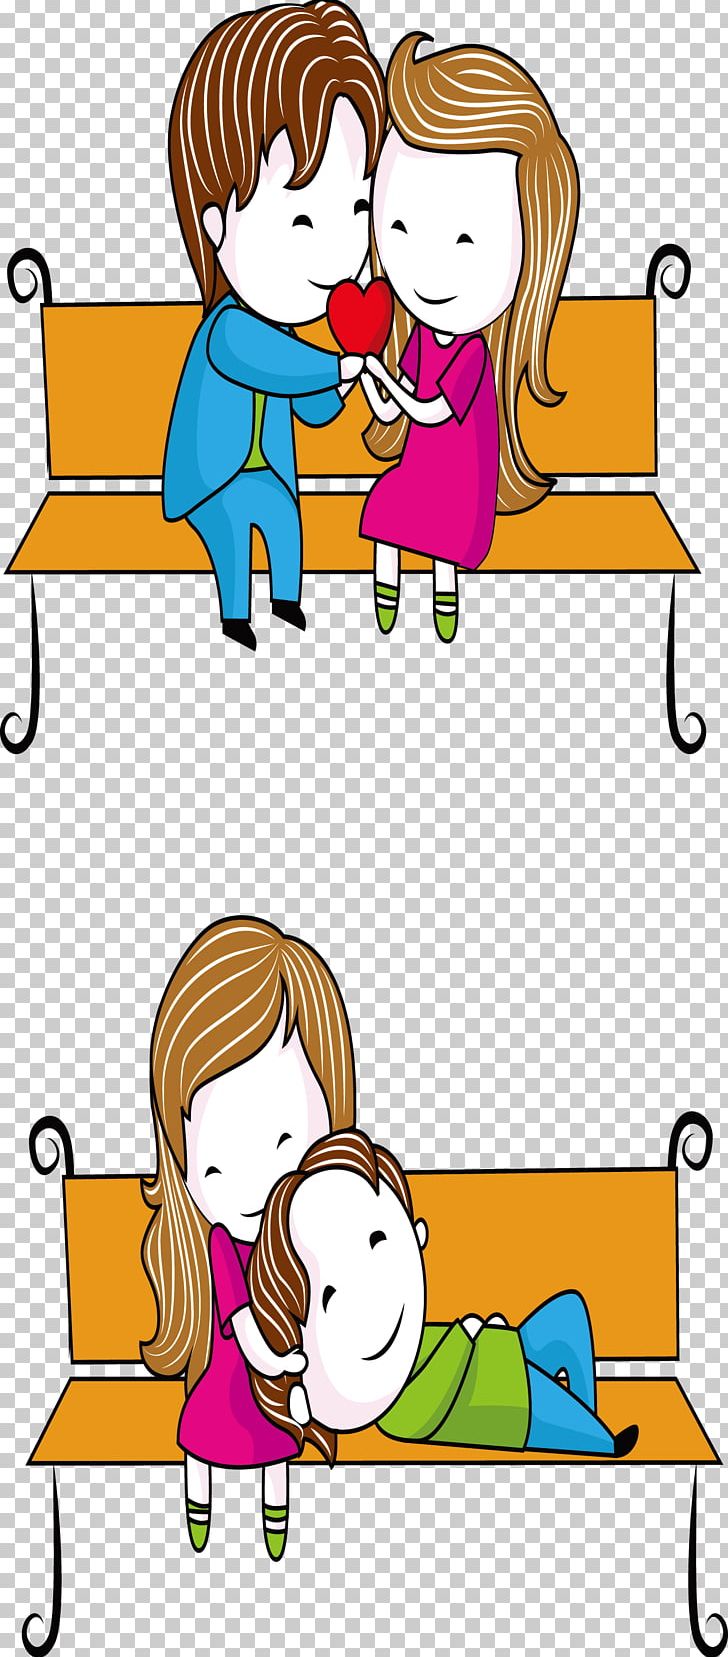 Falling In Love PNG, Clipart, Cartoon, Child, Comics, Conversation, Couples Free PNG Download